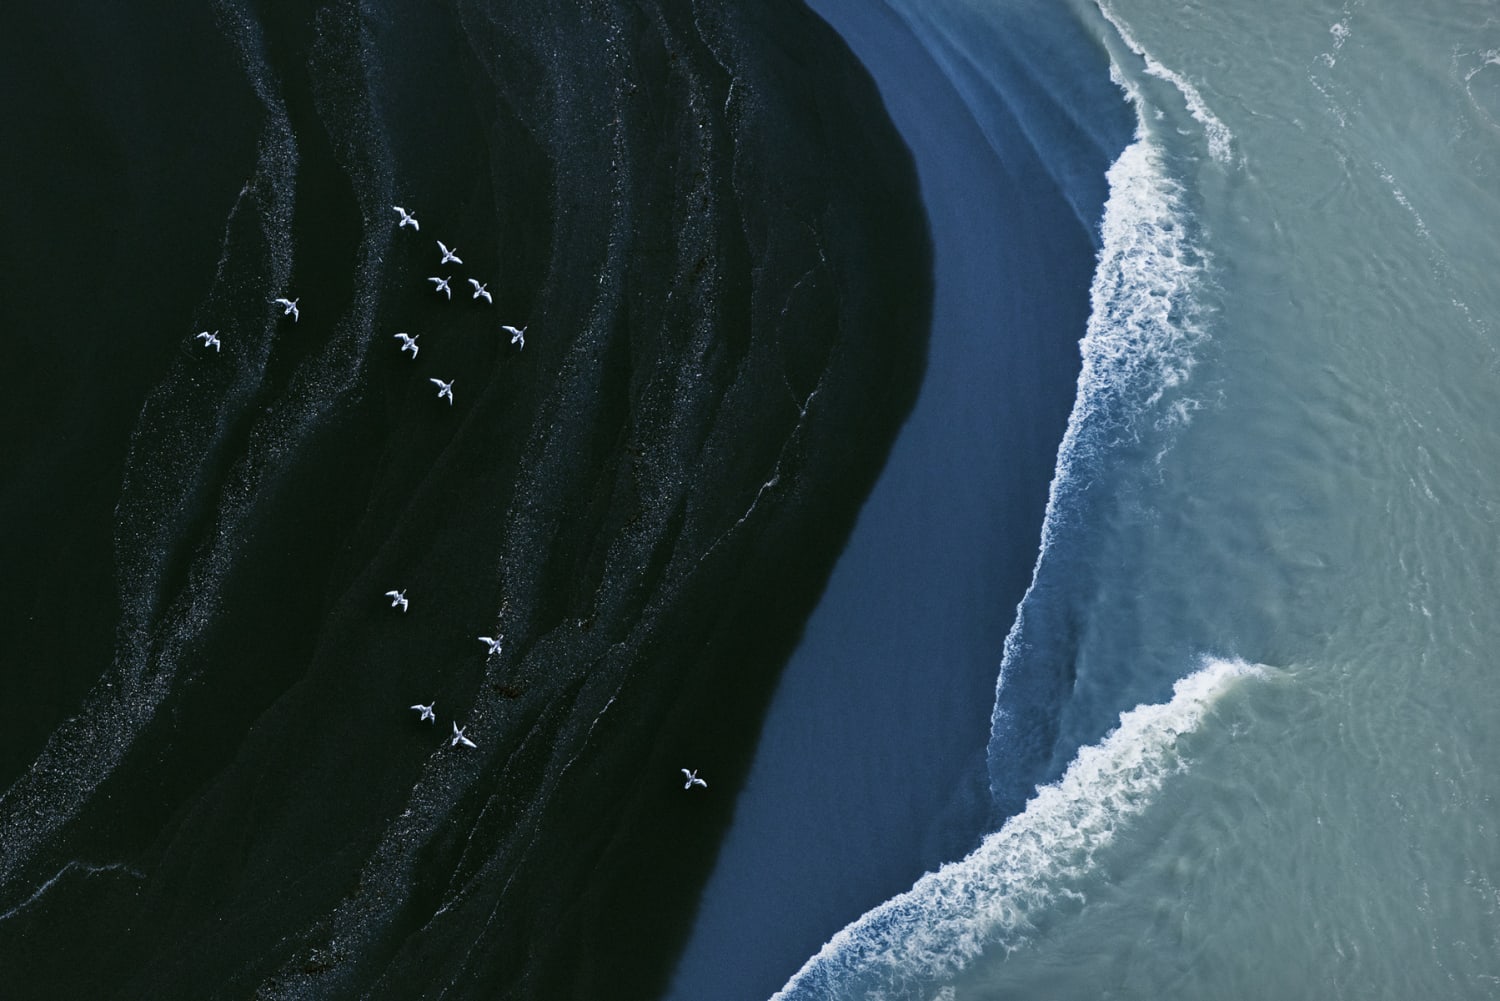 Rugged Greenery and Soaring Birds Unite Abstracted Landscapes of Iceland and Botswana — Colossal